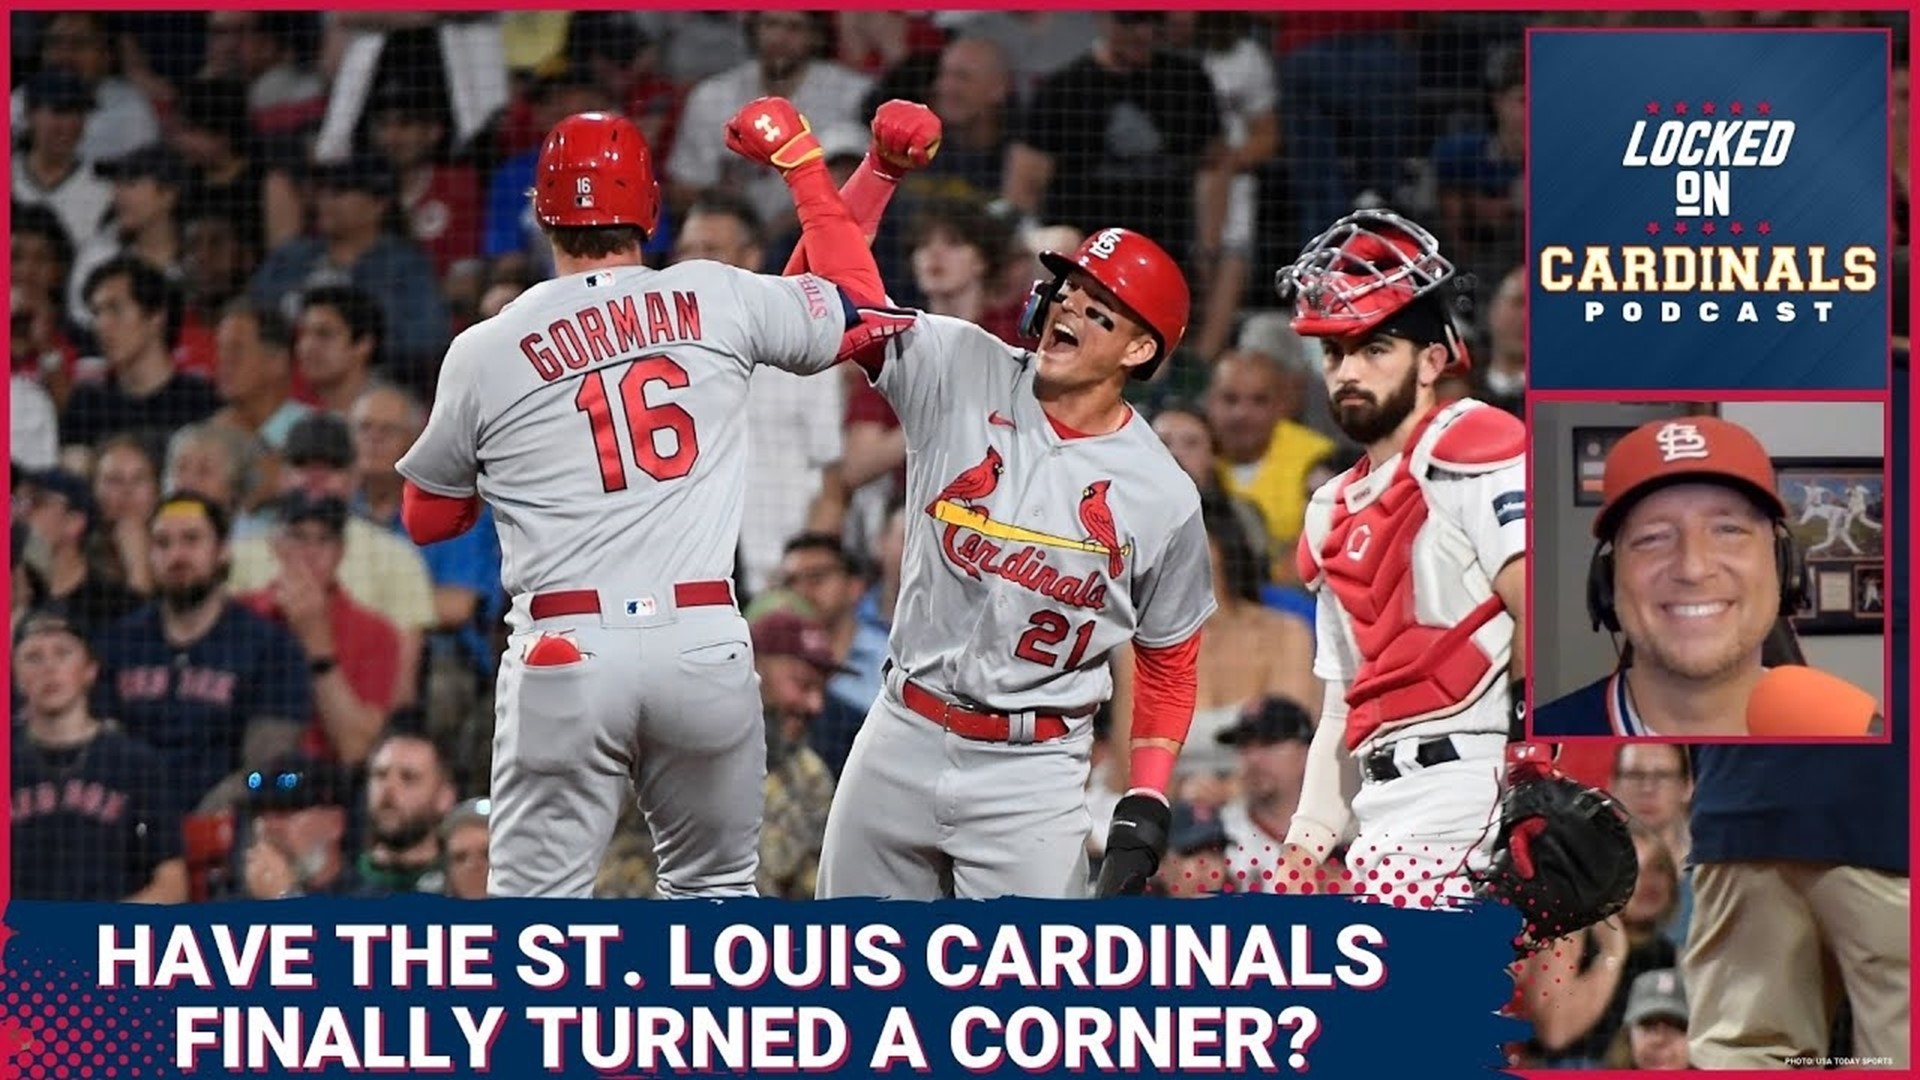 The St. Louis Cardinals Are Flying High After Their Sweep In Boston, The 1st Place Brewers Are Next